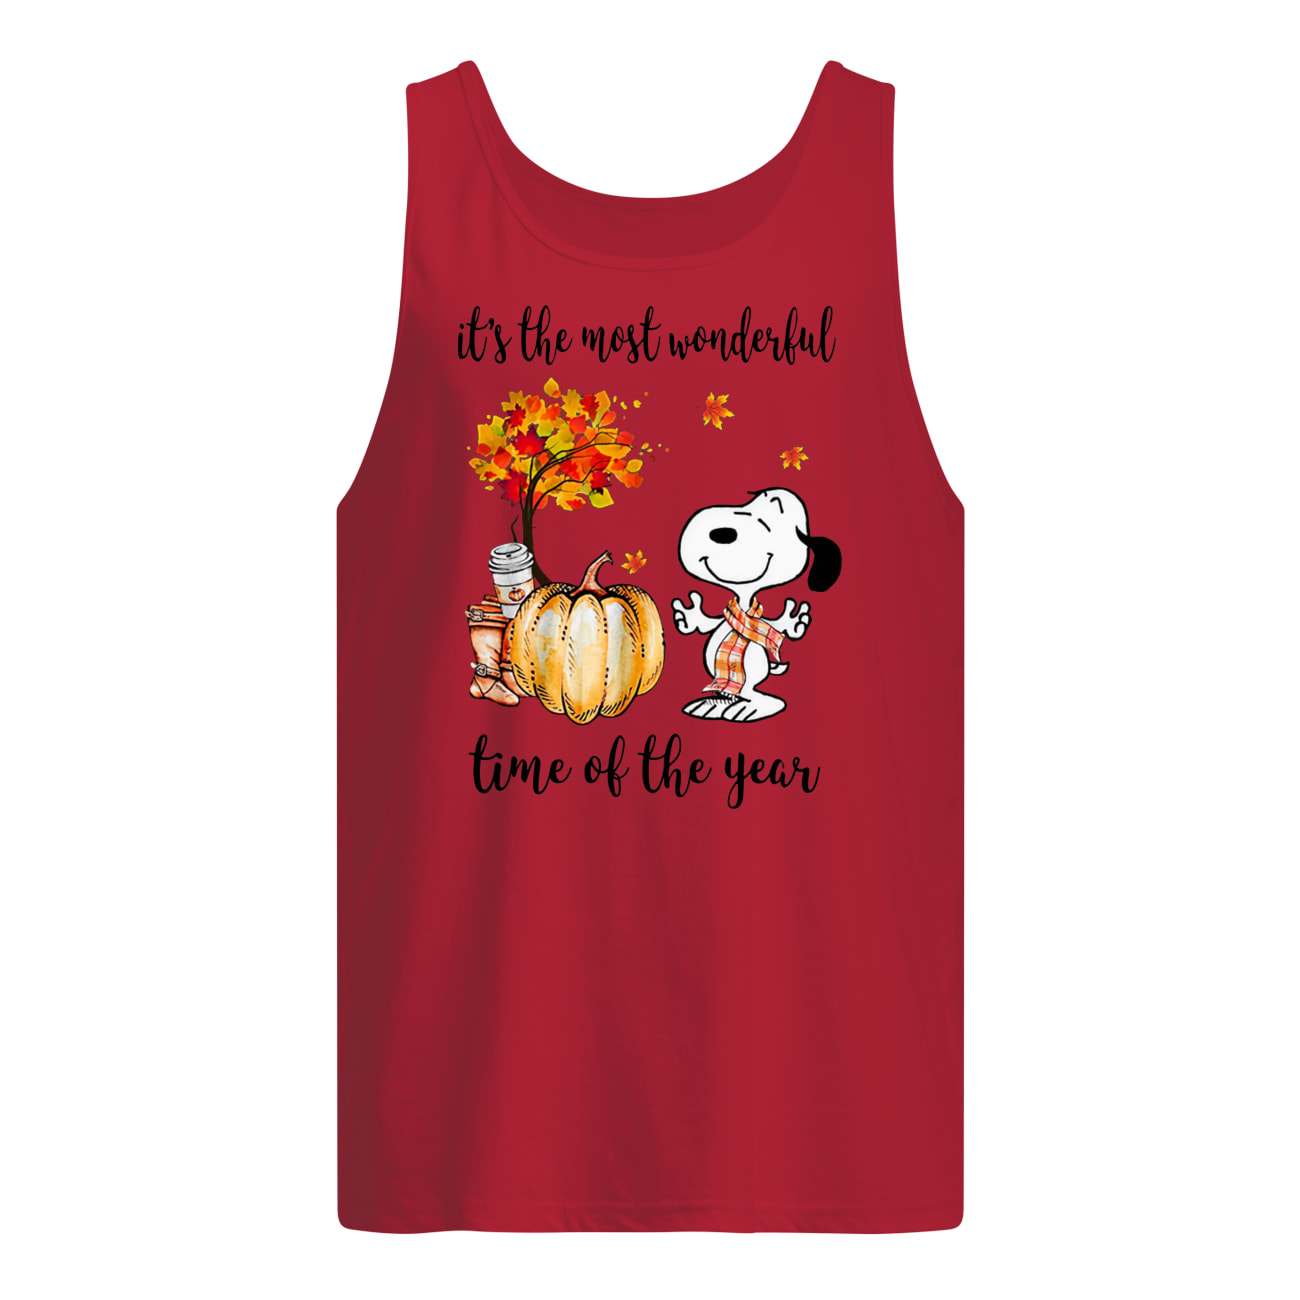 Snoopy it’s the most wonderful time of the year tank top